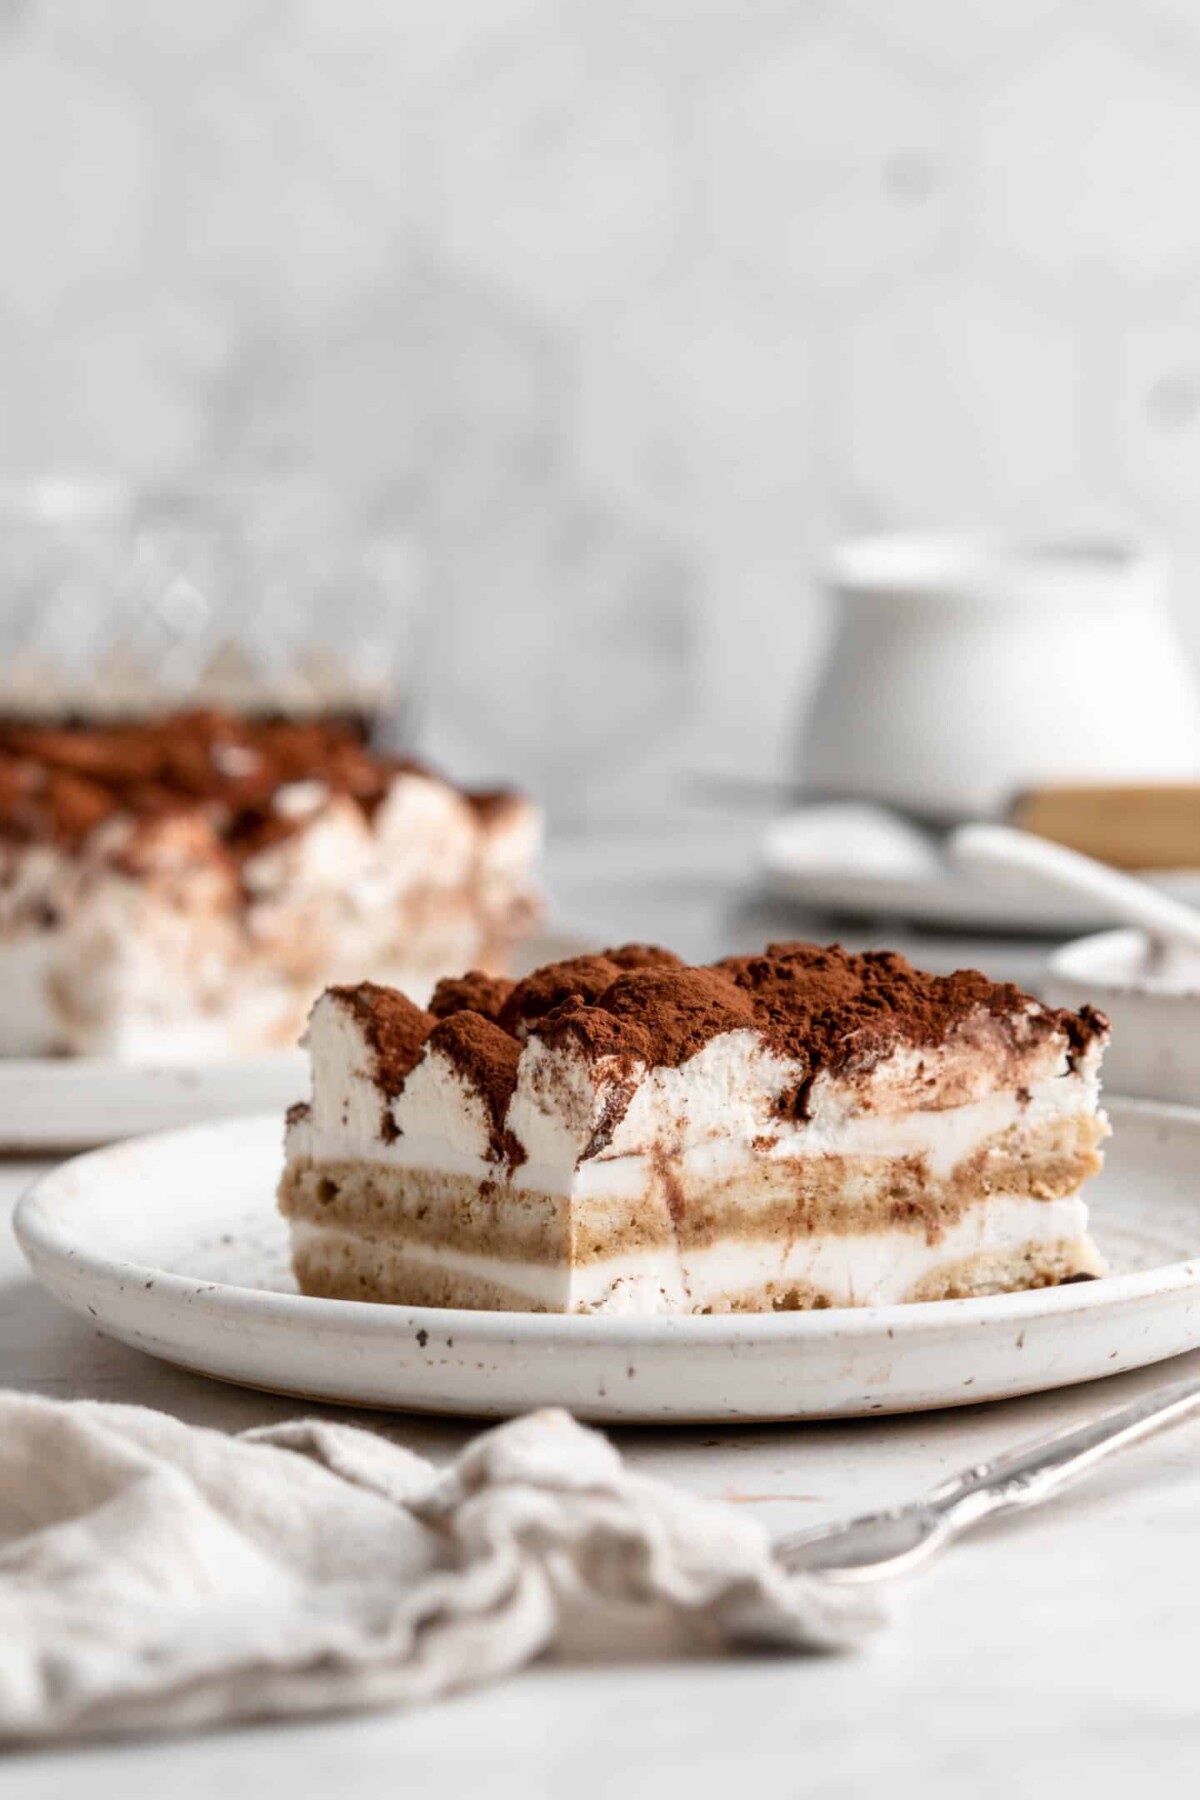 A slice of tiramisu on a plate, with another slice in the background